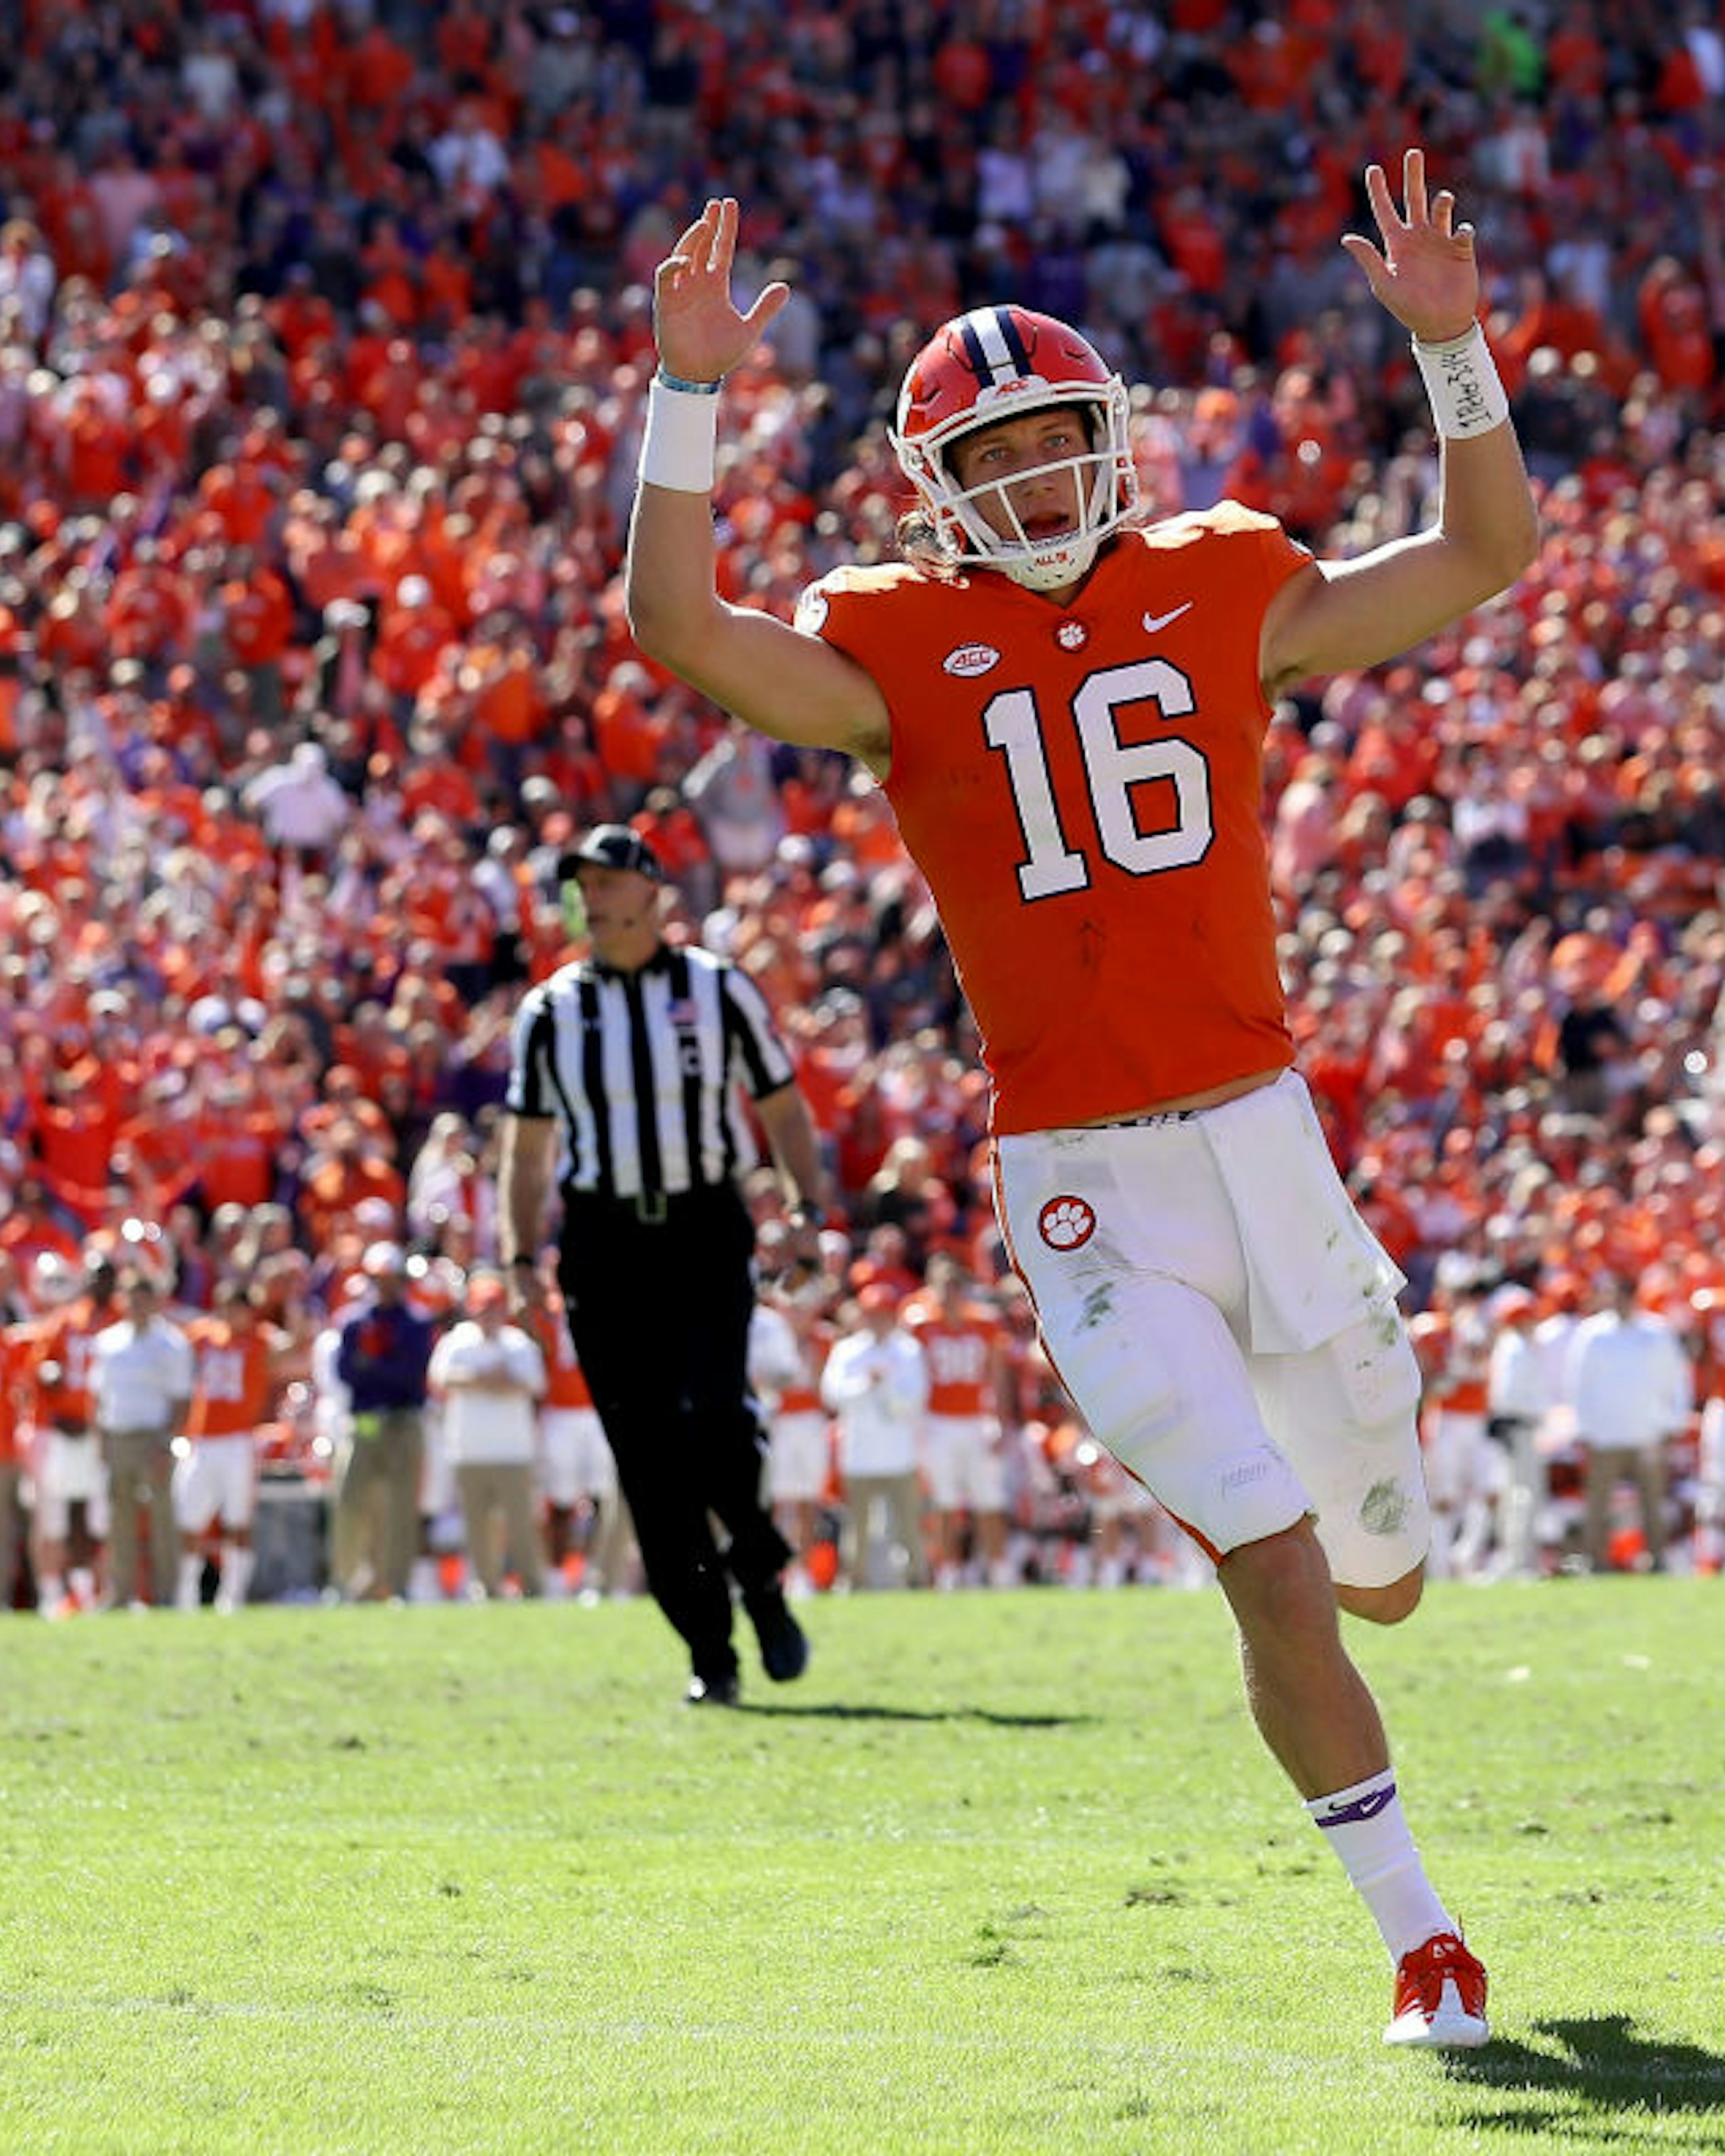 CLEMSON, SC - NOVEMBER 03: Trevor Lawrence #16 of the Clemson Tigers reacts after throwing a touchdown pass against the Louisville Cardinals during their game at Clemson Memorial Stadium on November 3, 2018 in Clemson, South Carolina. (Photo by Streeter Lecka/Getty Images)